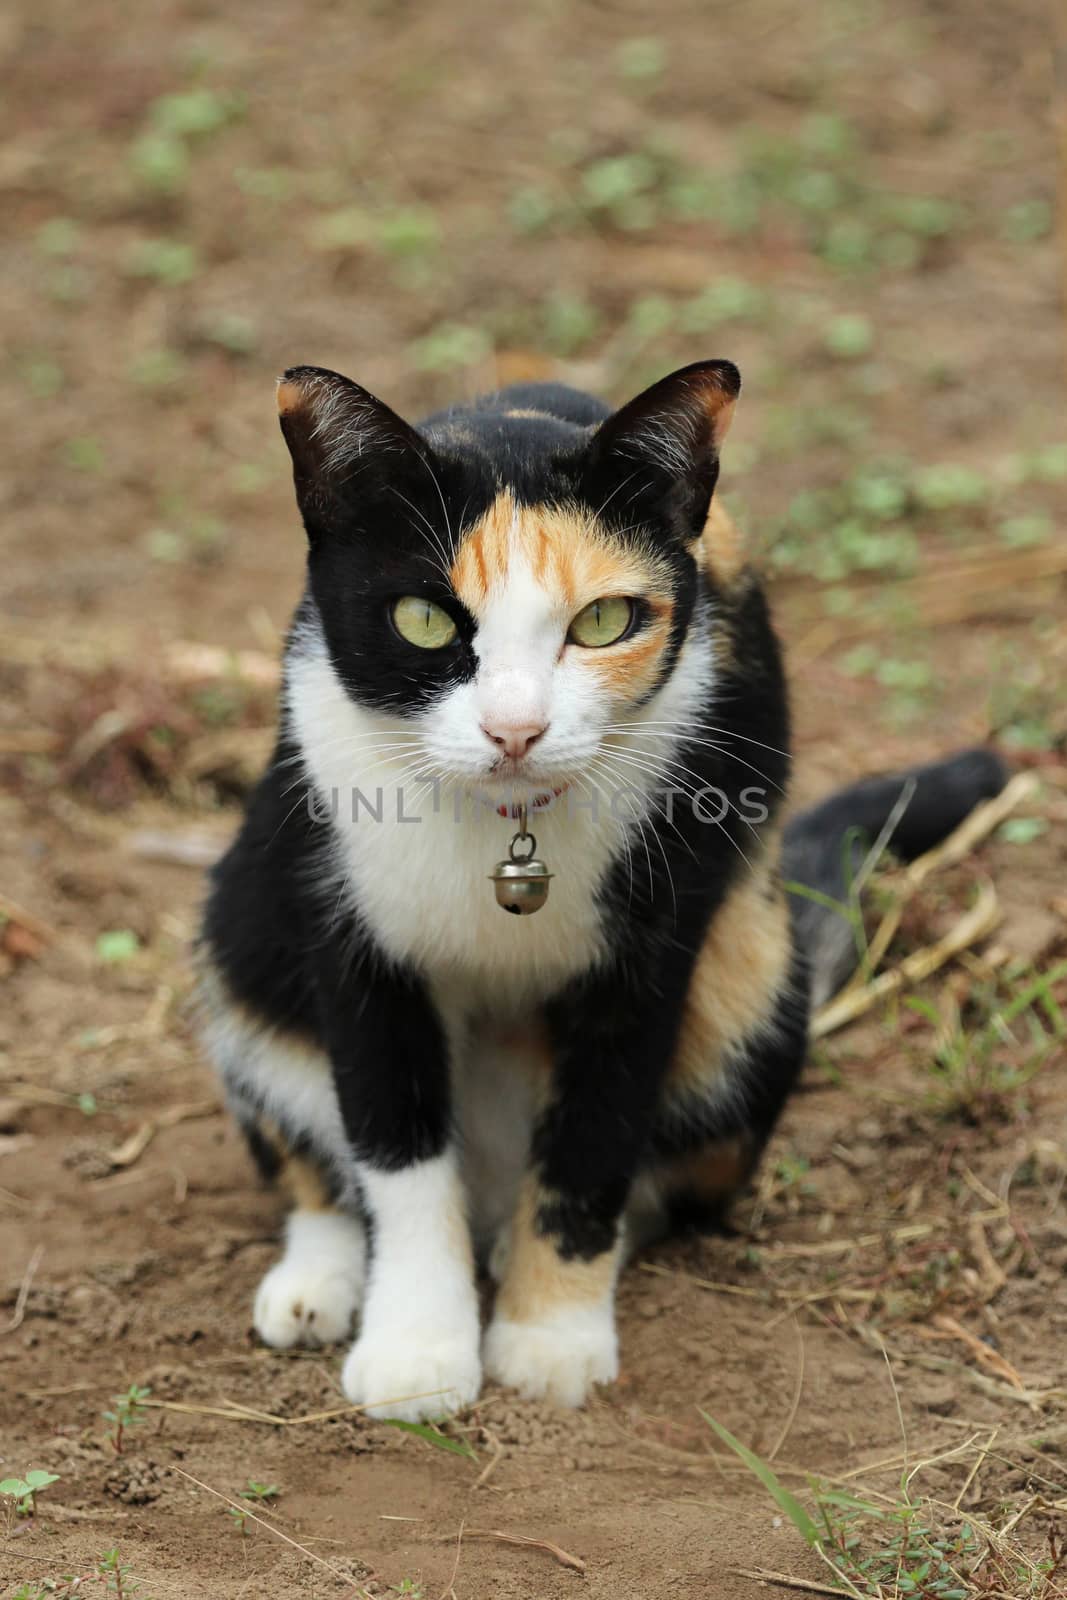 Image of a cat sat on the ground by yod67